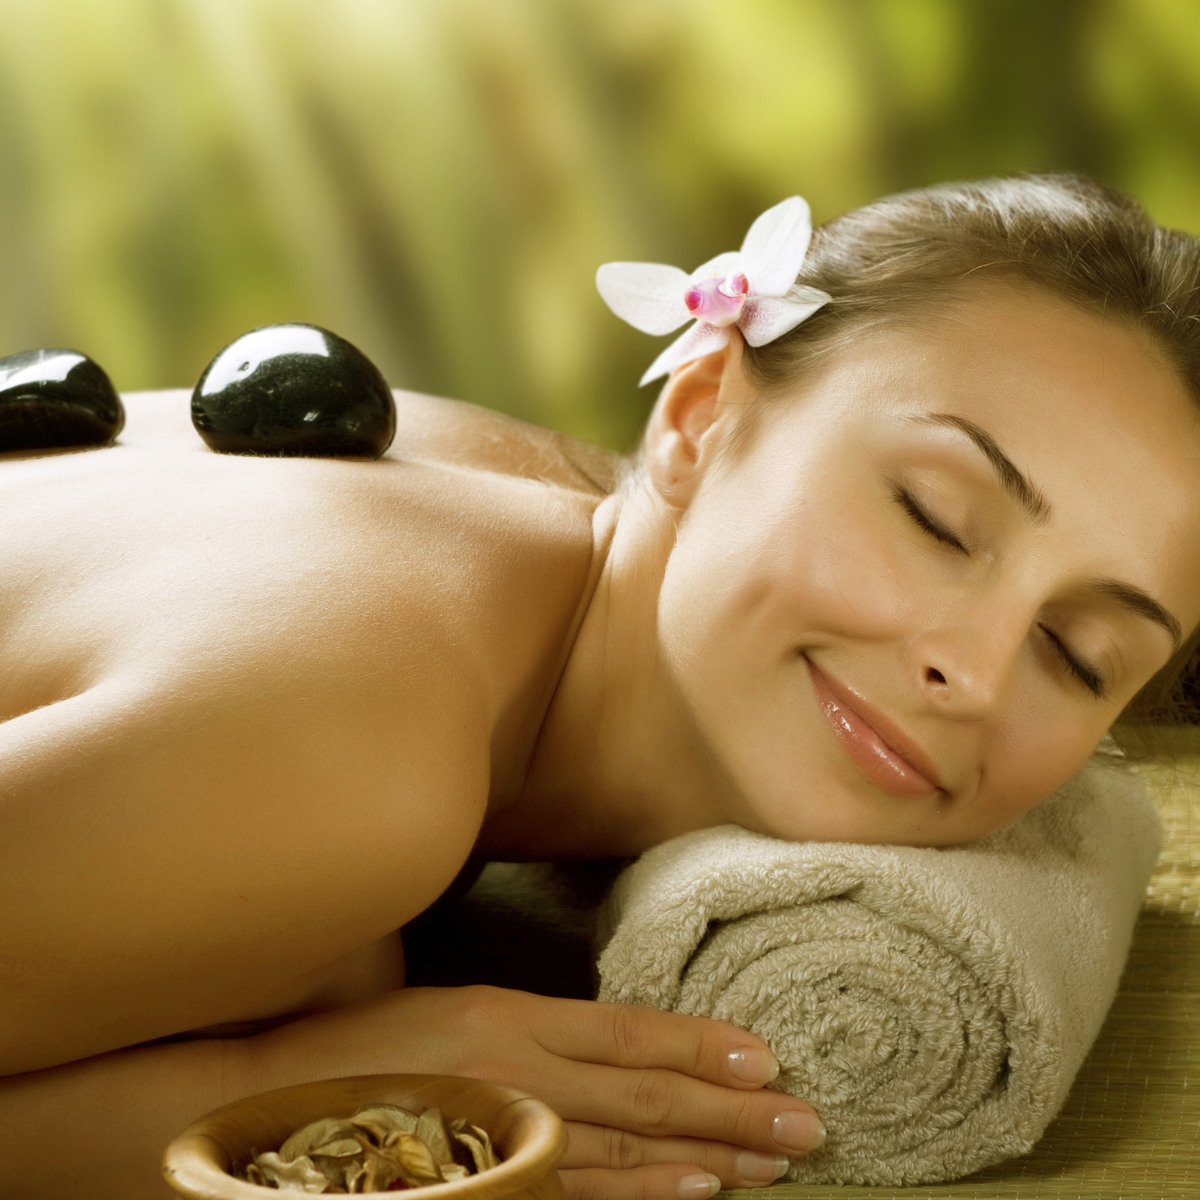 10. Indulge Her with a Relaxing Spa Day Package for Your 20th Anniversary